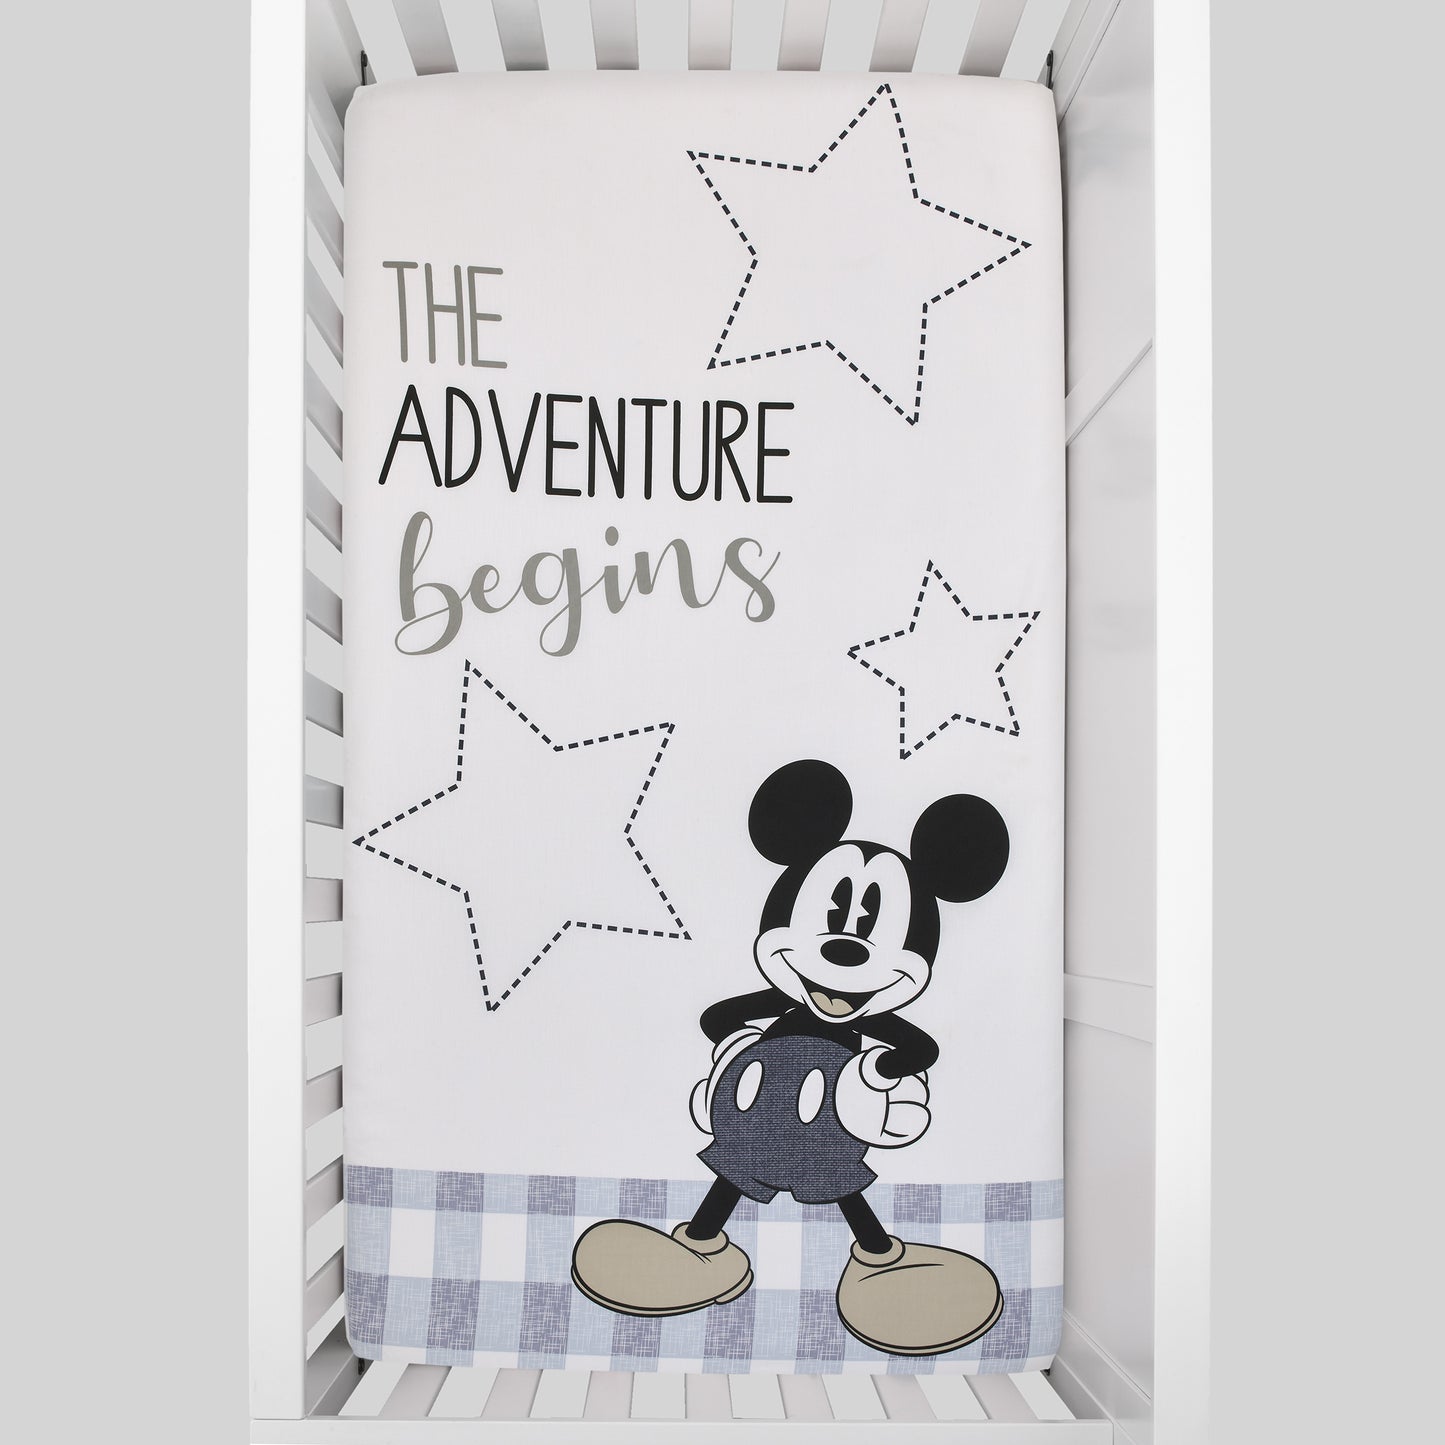 Disney Mickey Mouse - Call Me Mickey White and Blue The Adventure Begins Stars and Gingham 100% Cotton Photo Op Nursery Fitted Crib Sheet